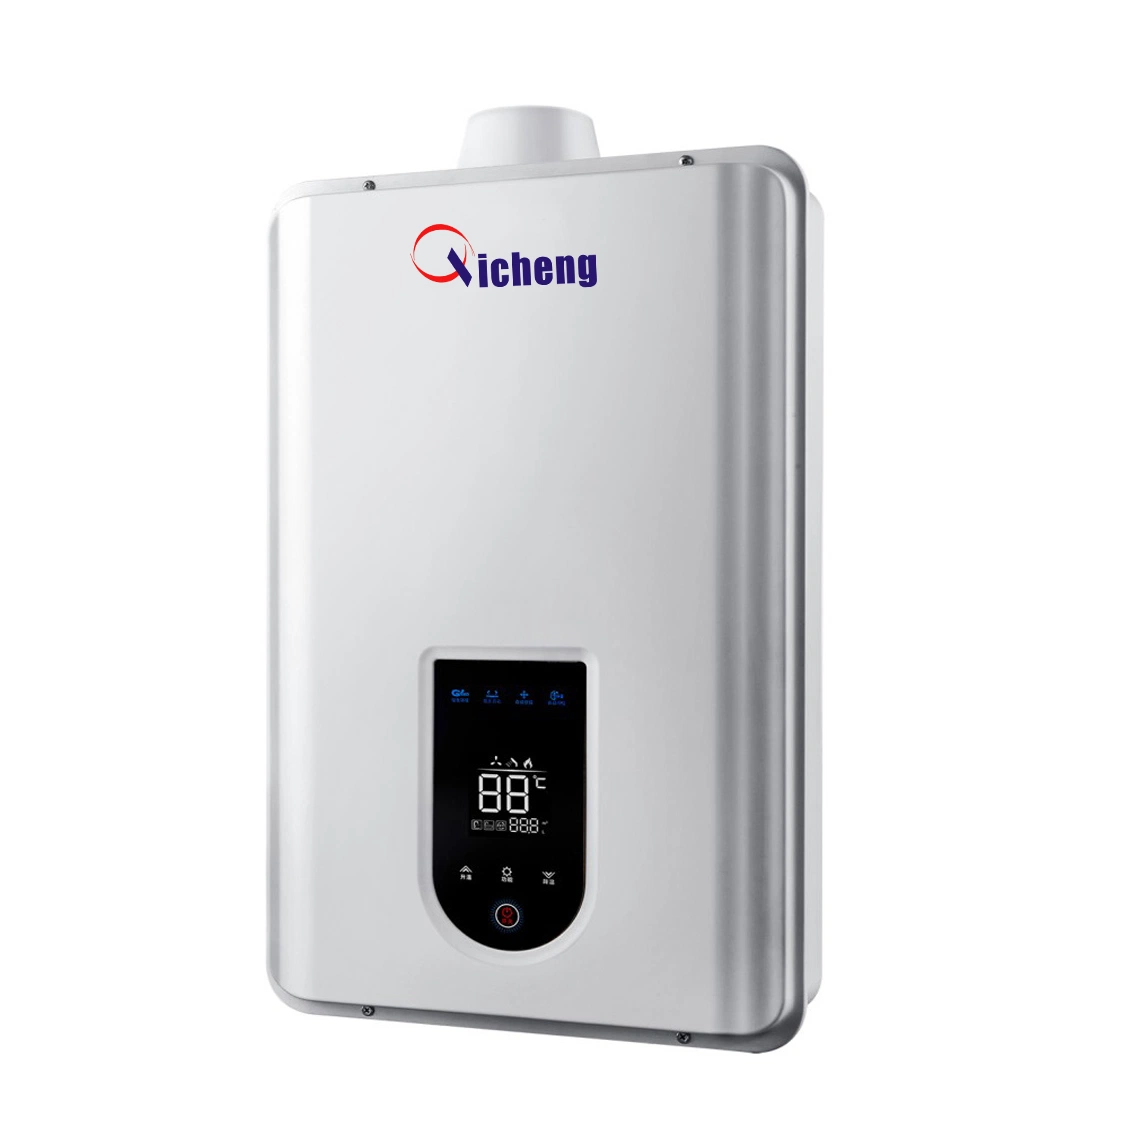 High-Efficiency and Energy-Saving Automatic 17-Liter Constant Temperature Gas Water Heater